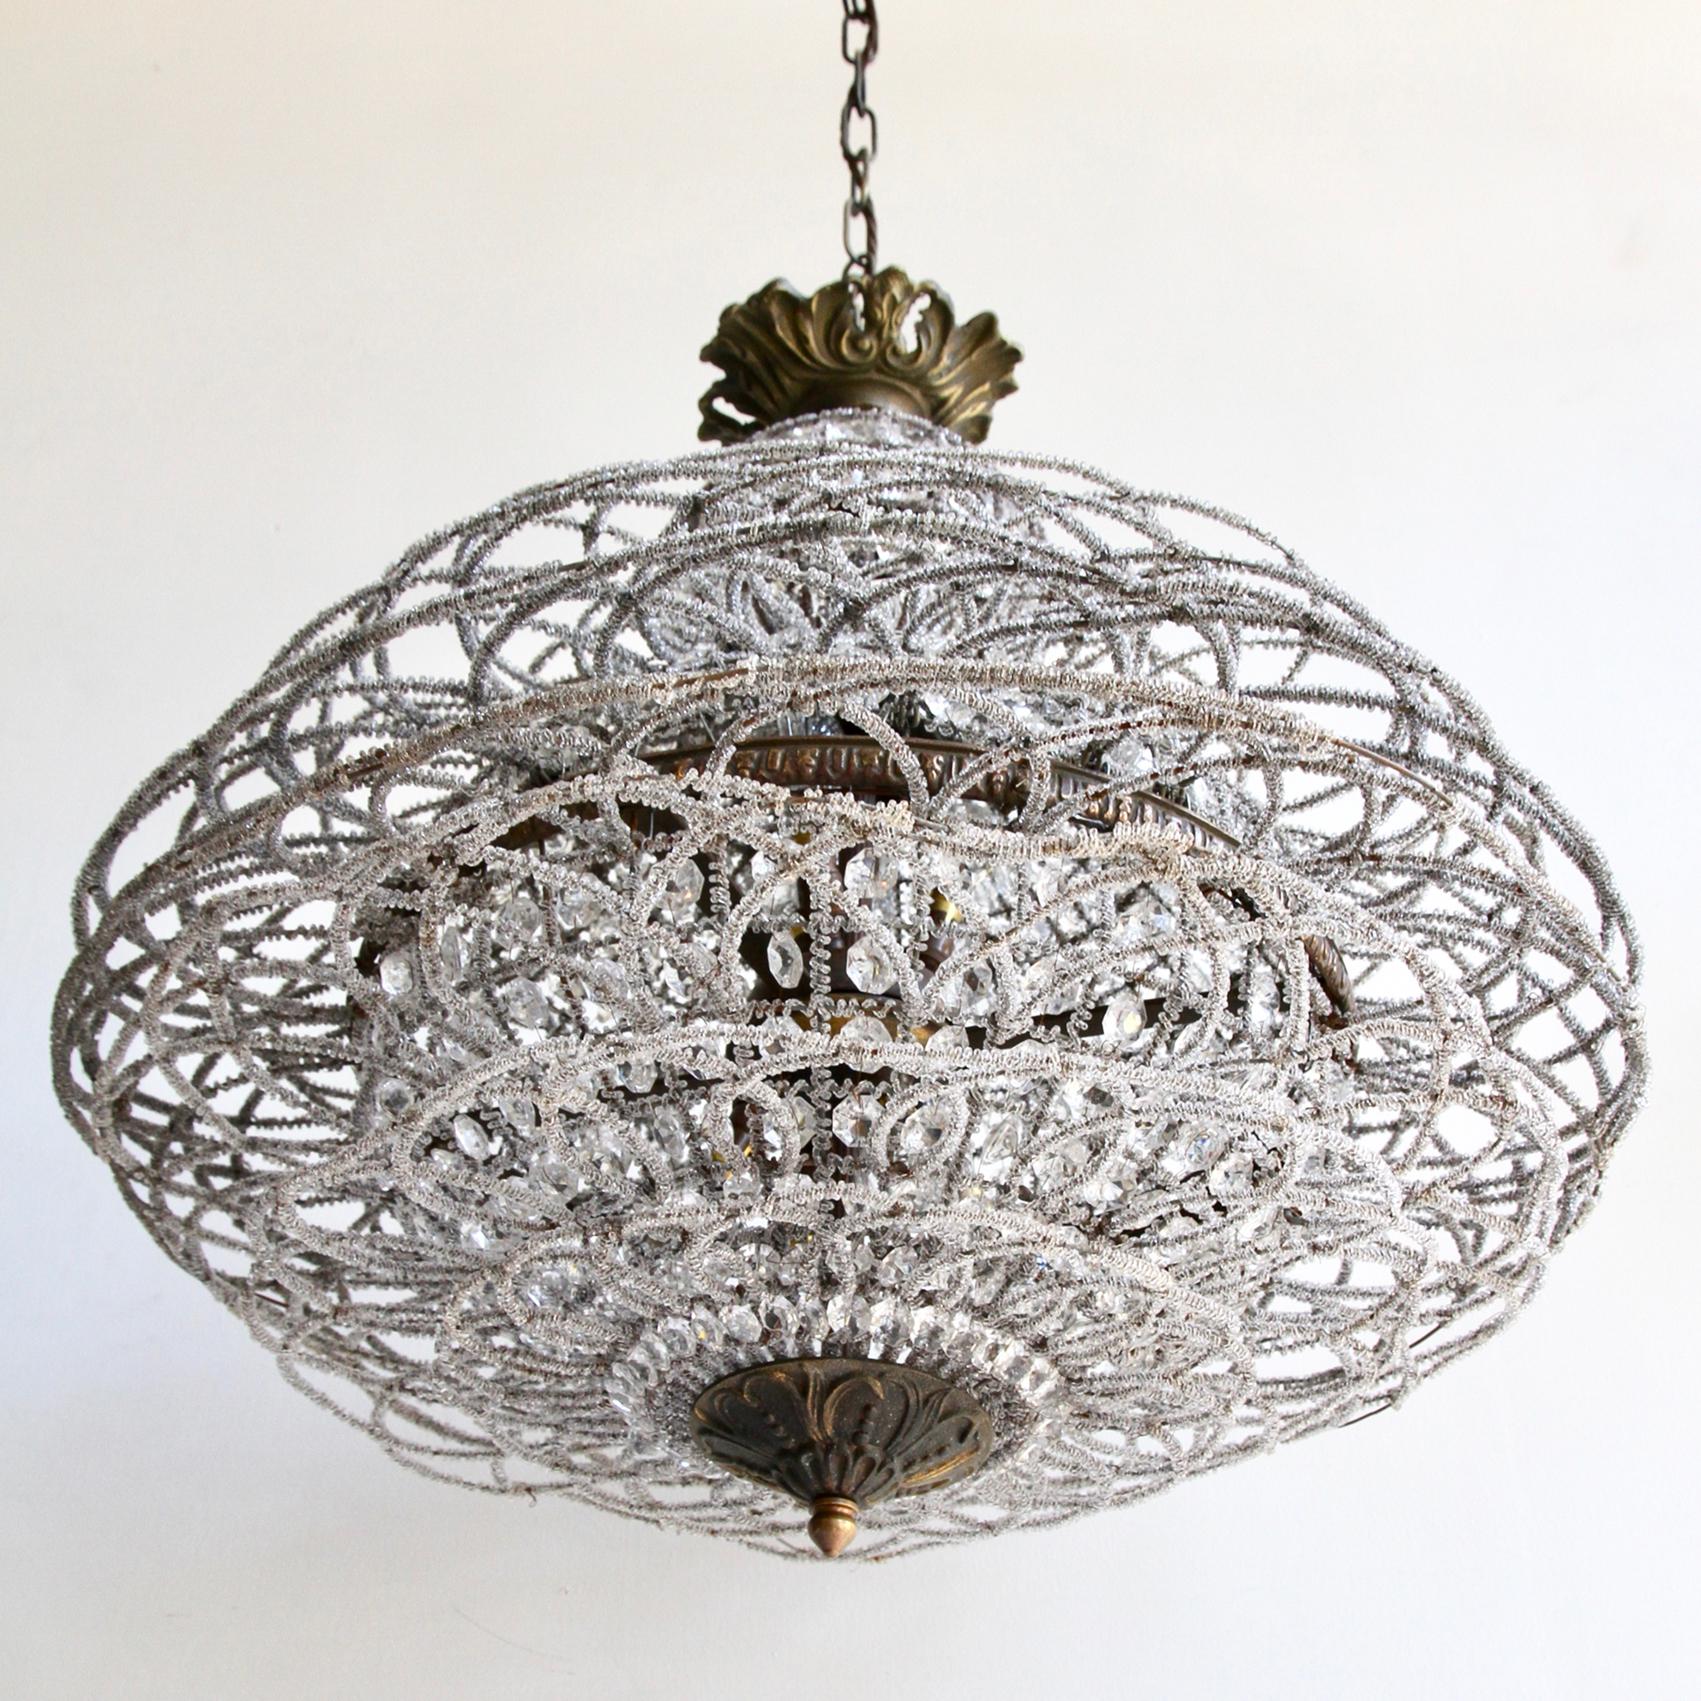 This charming French globe chandelier is in the style of the Montgolfier Balloon chandeliers types with outer rings. The framework is wrapped in glass beads and encased with glass buttons. The lamps are positioned so that when it is lit there is an